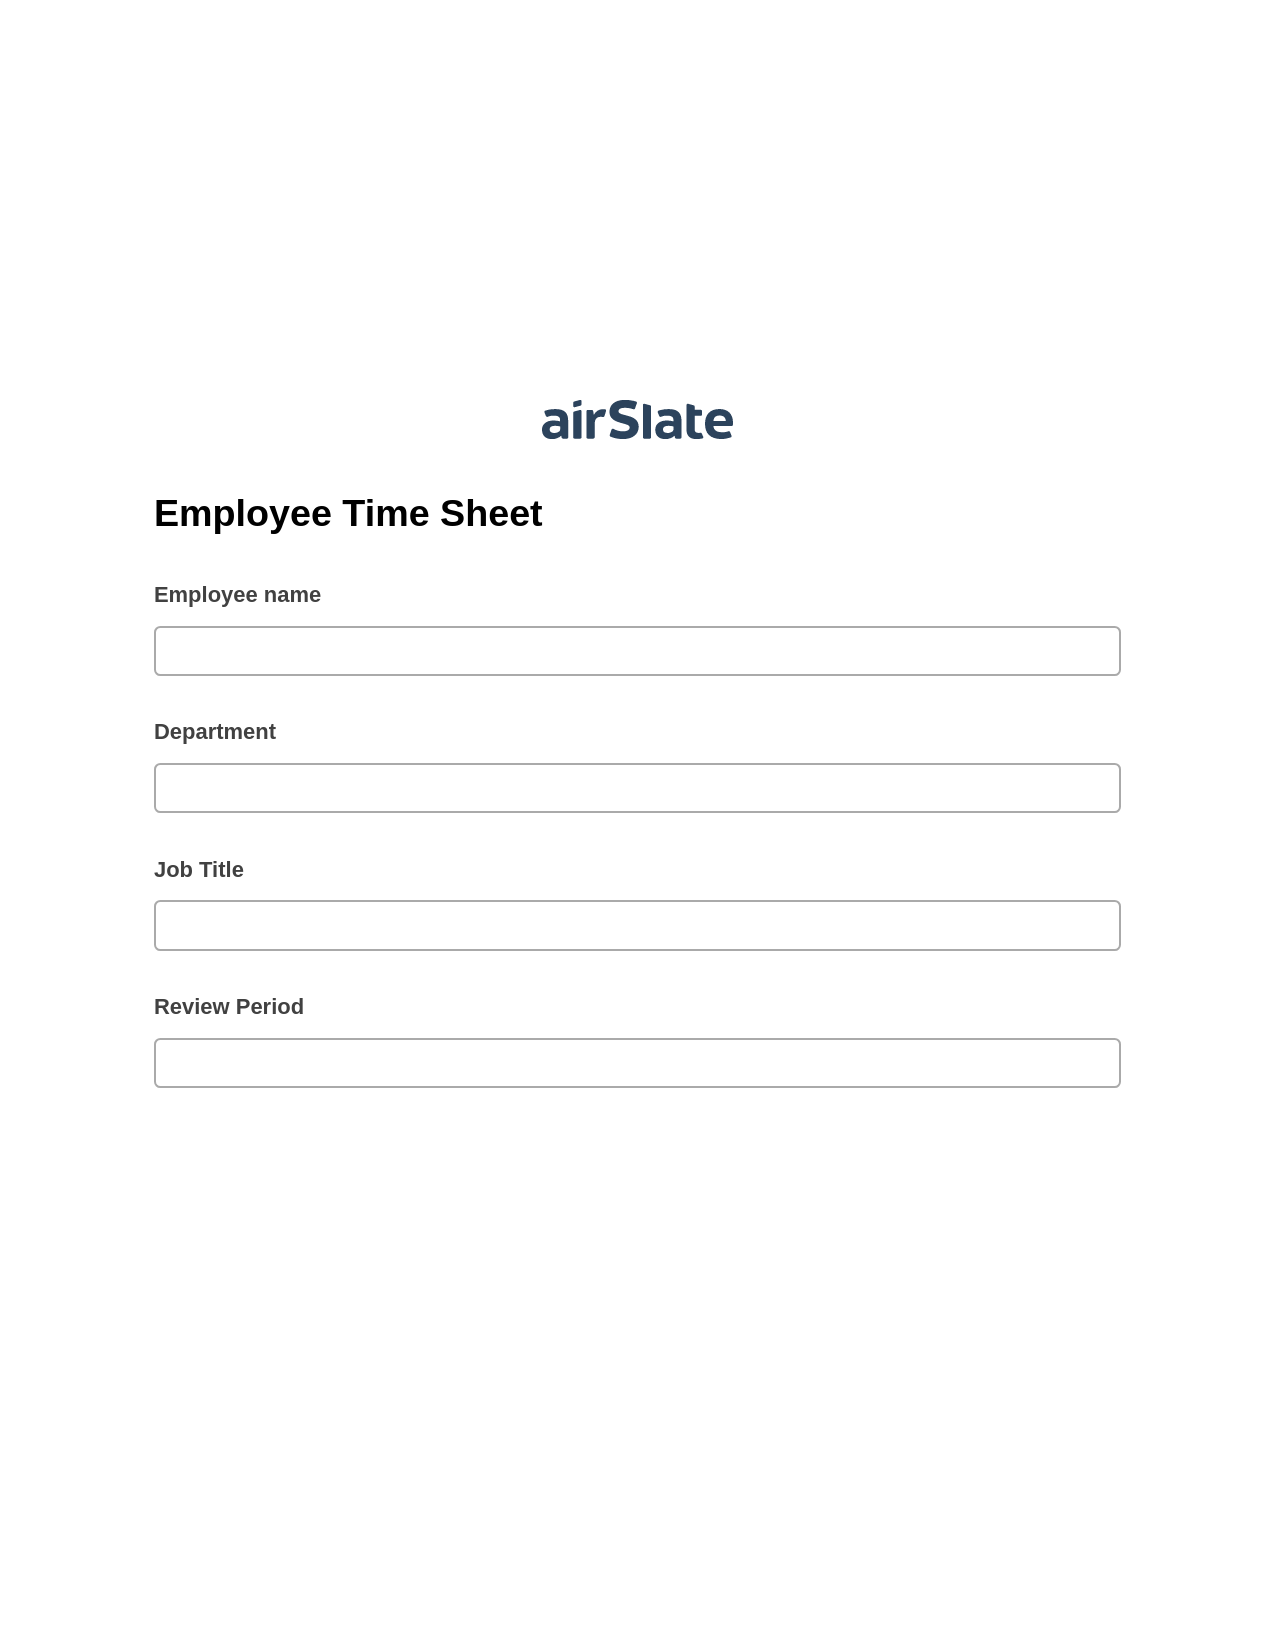 Employee Time Sheet Pre-fill from Salesforce Records Bot, Unassign Role Bot, Archive to Box Bot